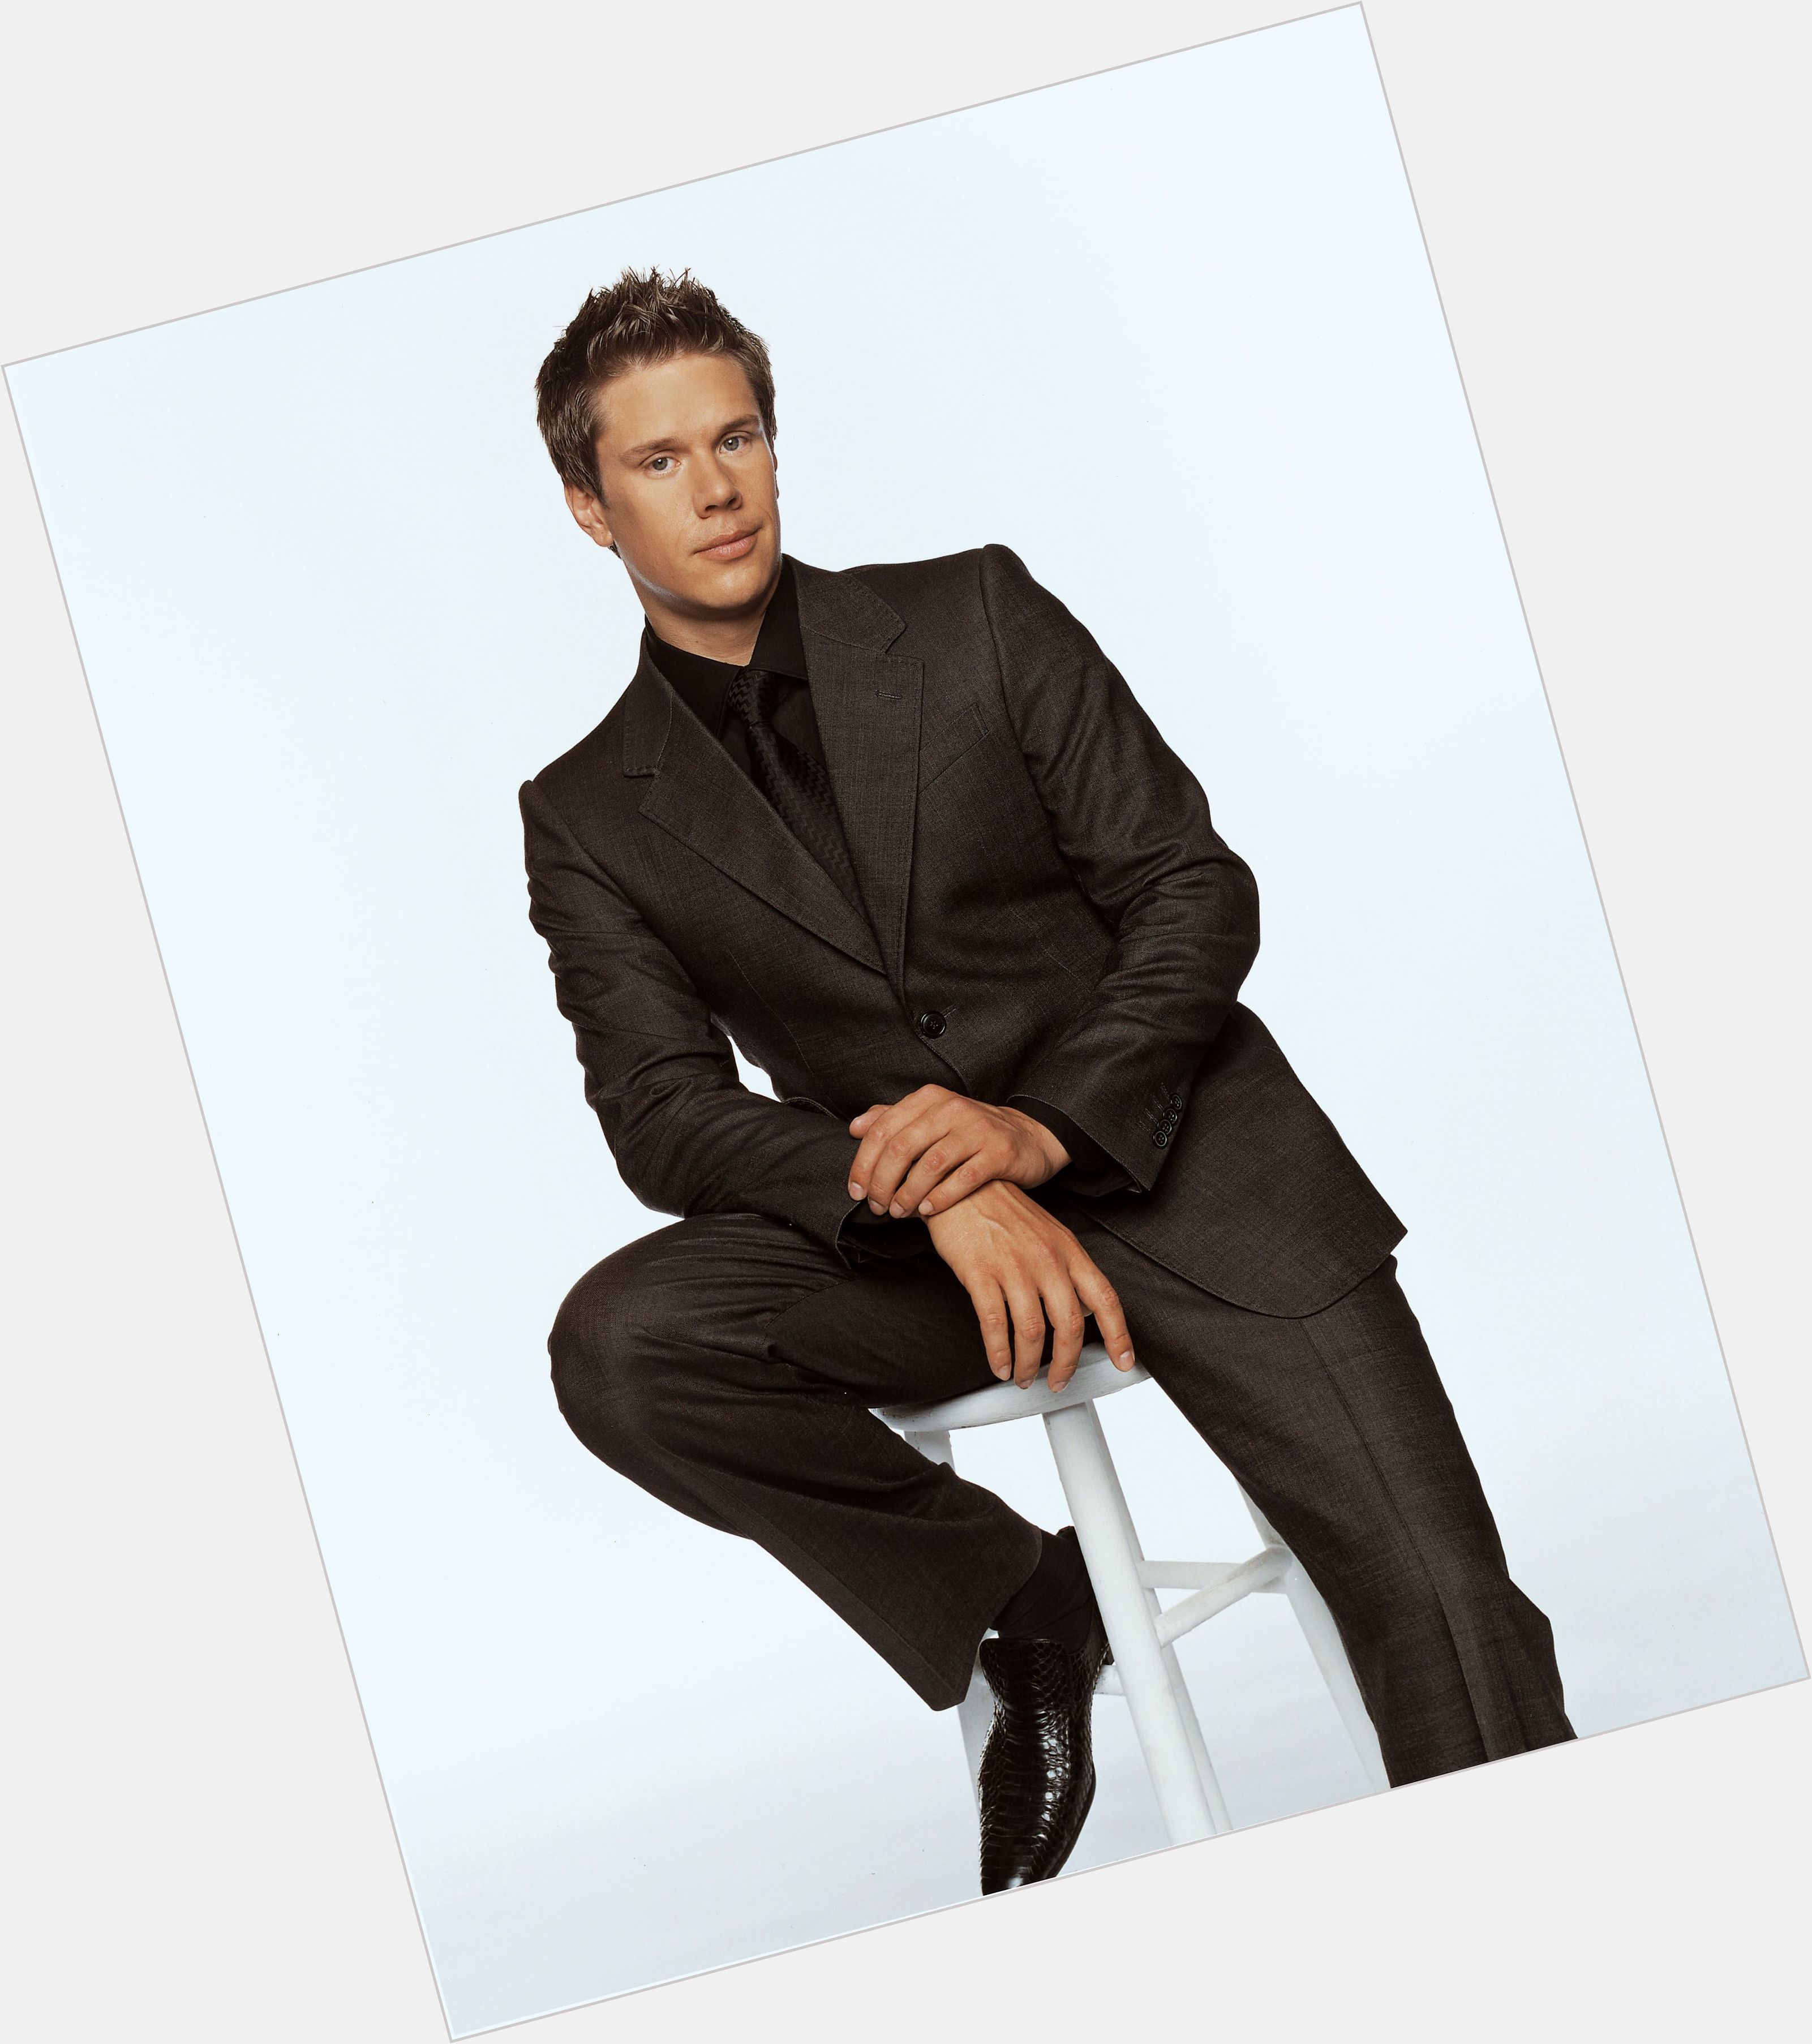 <a href="/hot-men/david-miller/is-he-il-divo-married-what-doing-now">David Miller</a>  